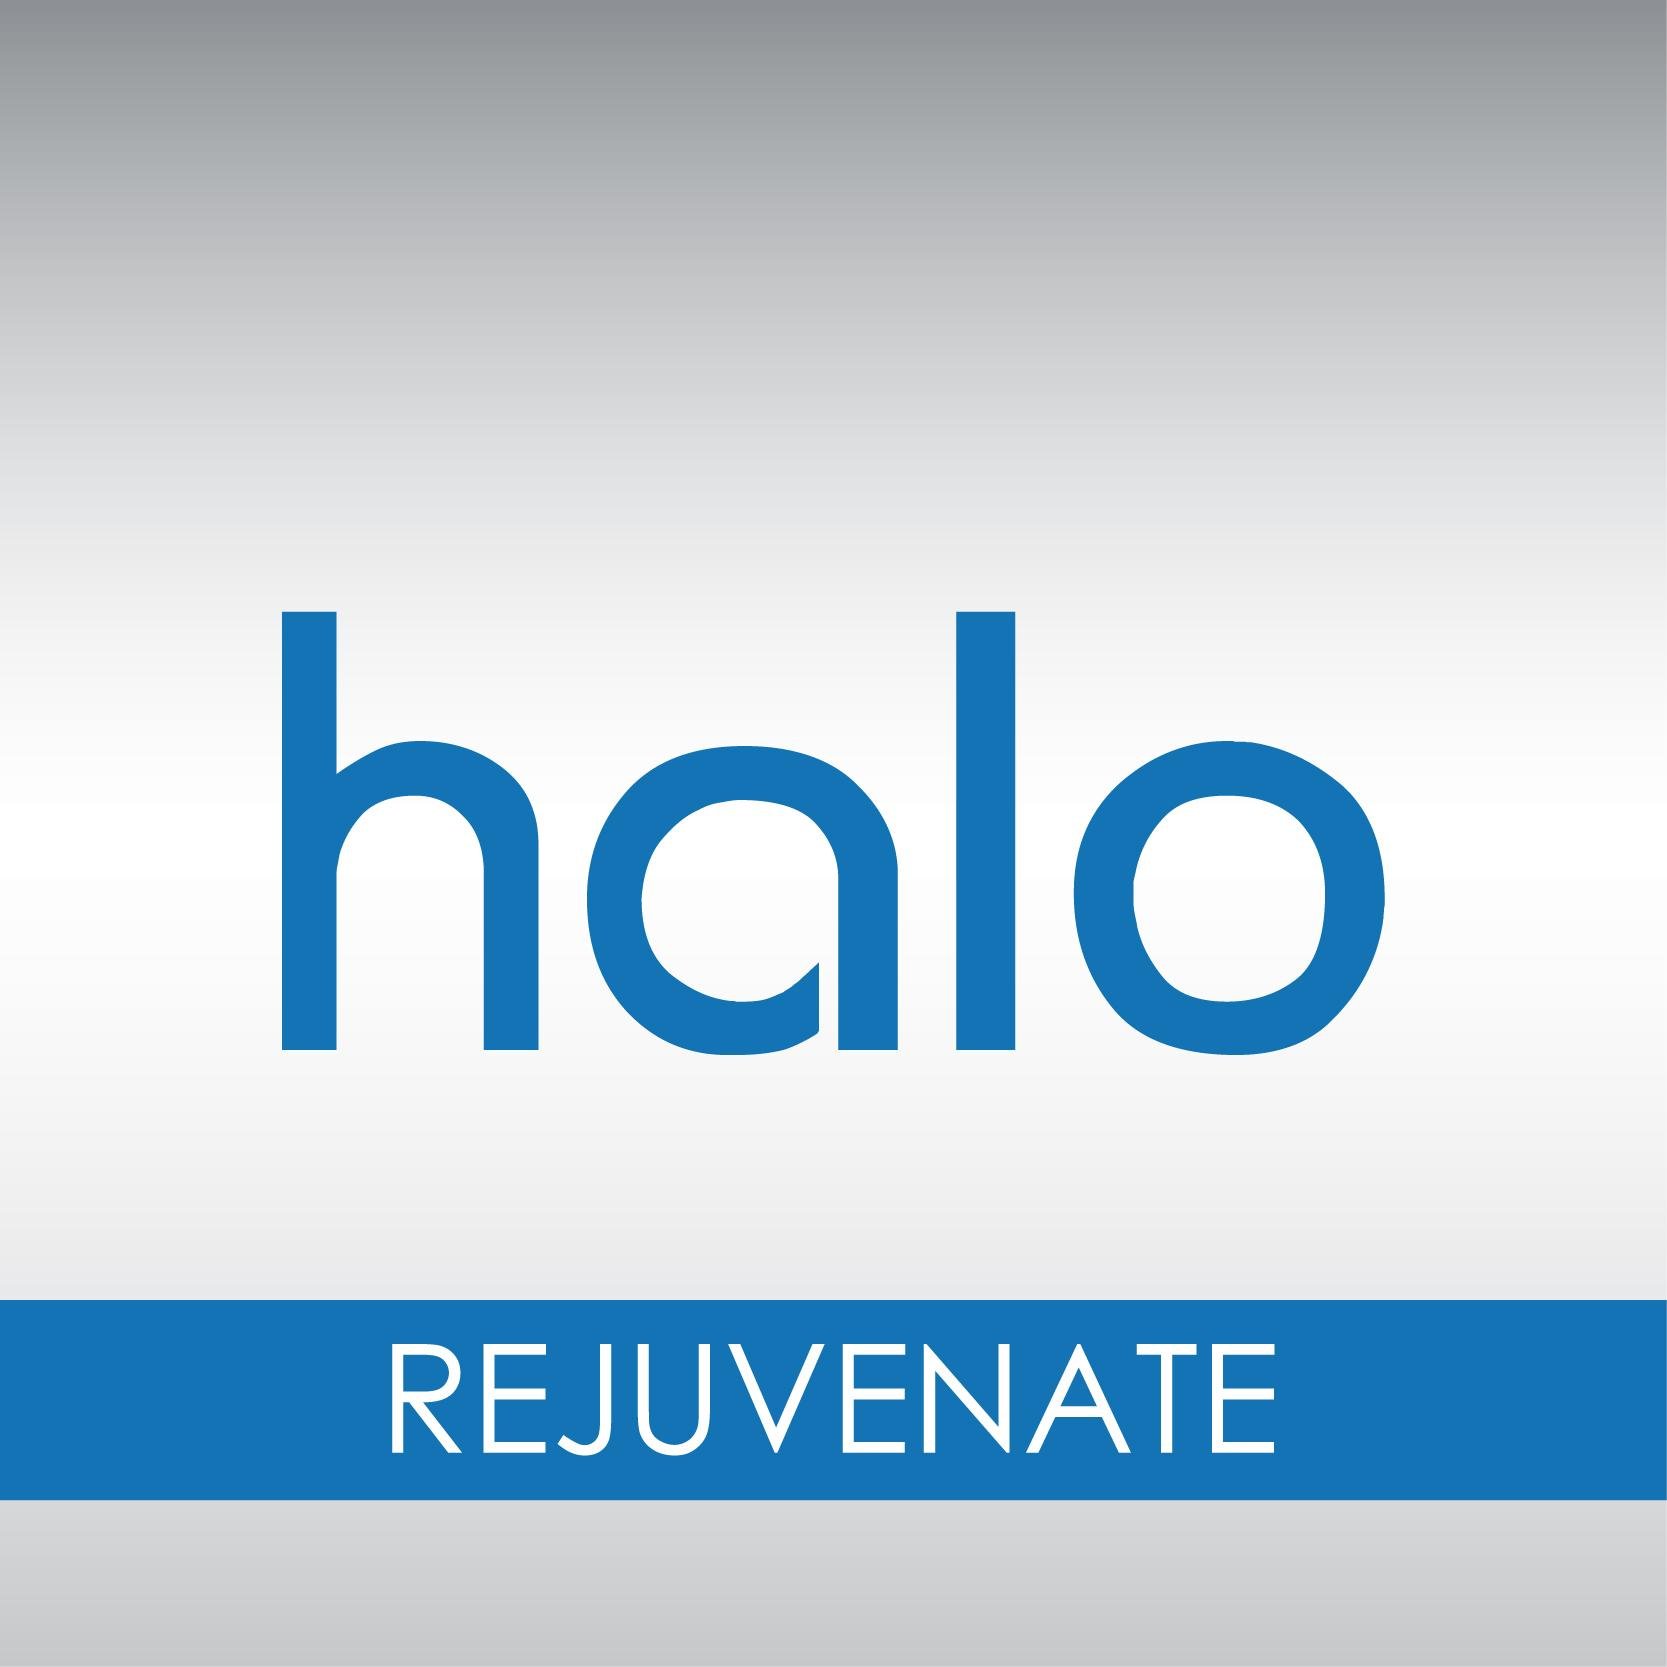 Halo is a unique patented Skin Repair Cream, that repairs sun damage, reduces wrinkles-fine lines, & restores depleted collagen. 30 day money back guarantee!